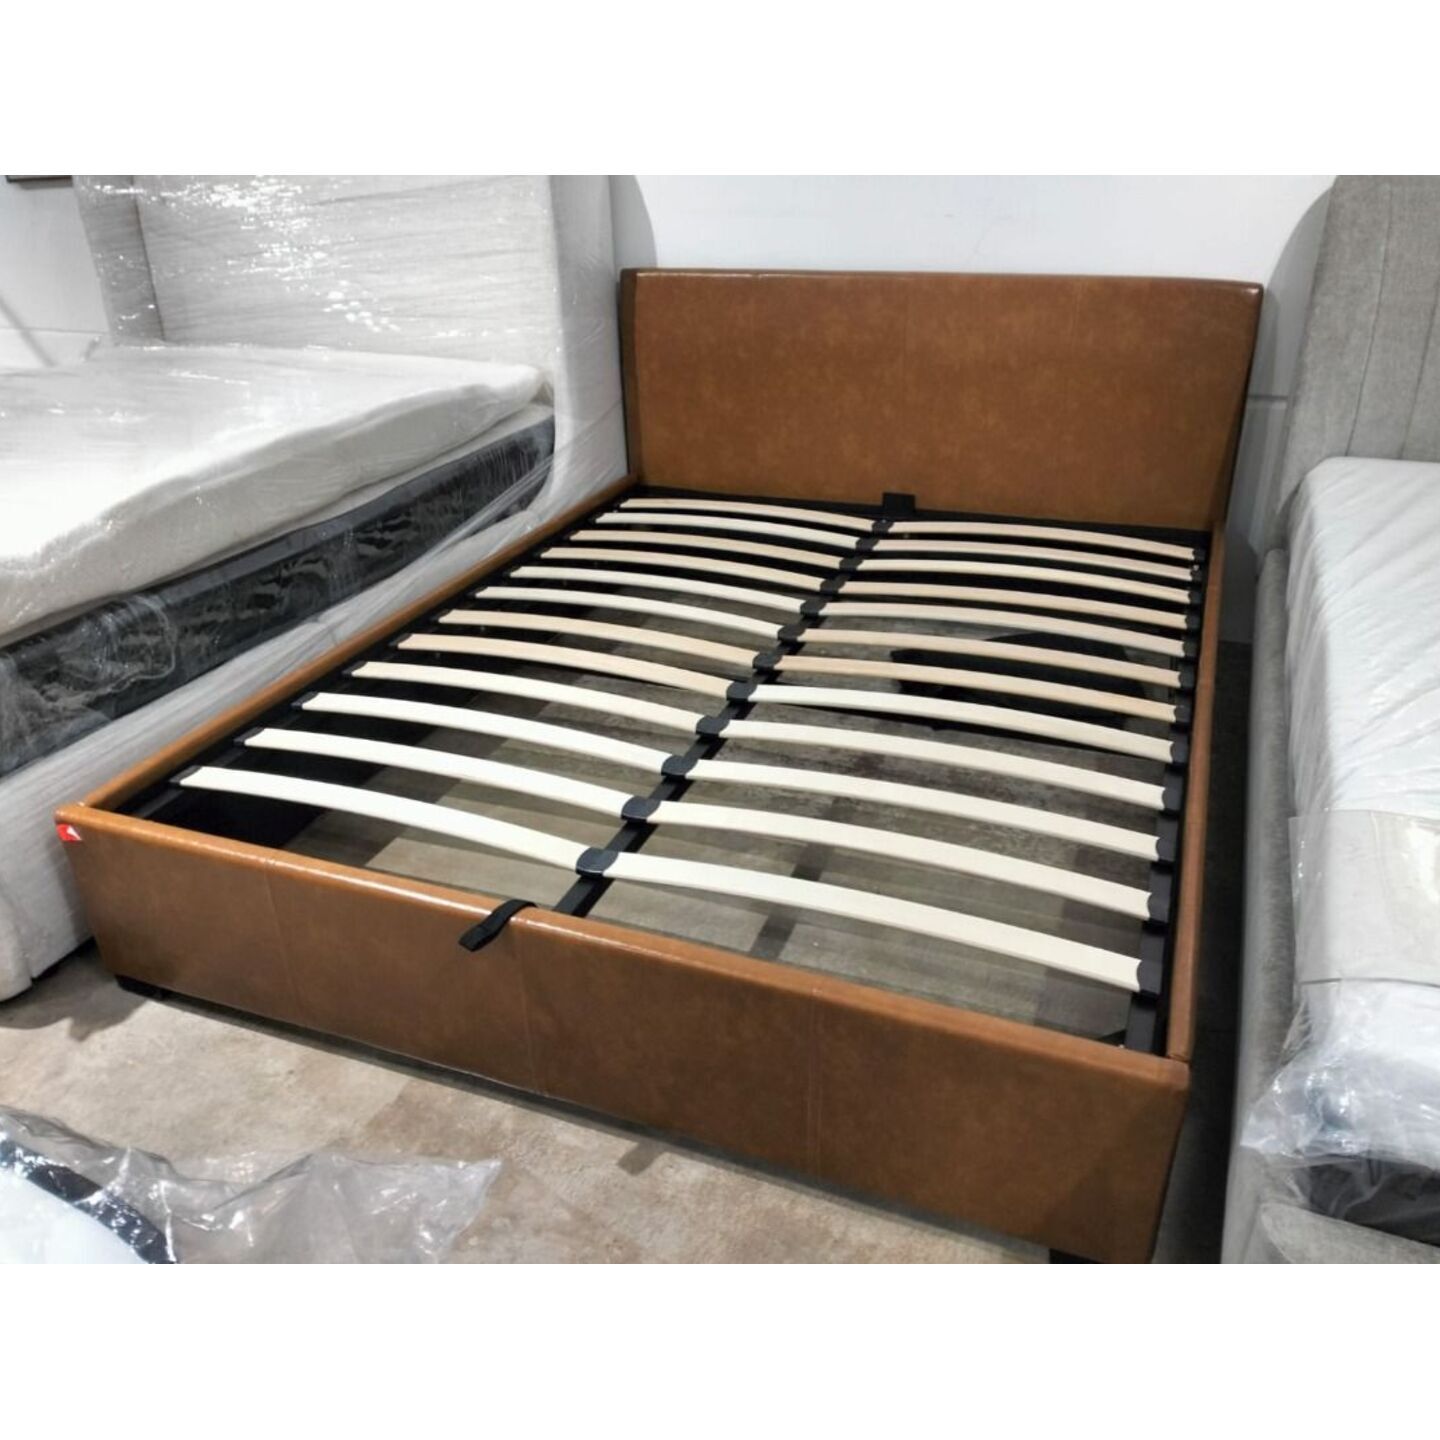 JOEDE Queen Size Storage Bed Frame in BROWN PU